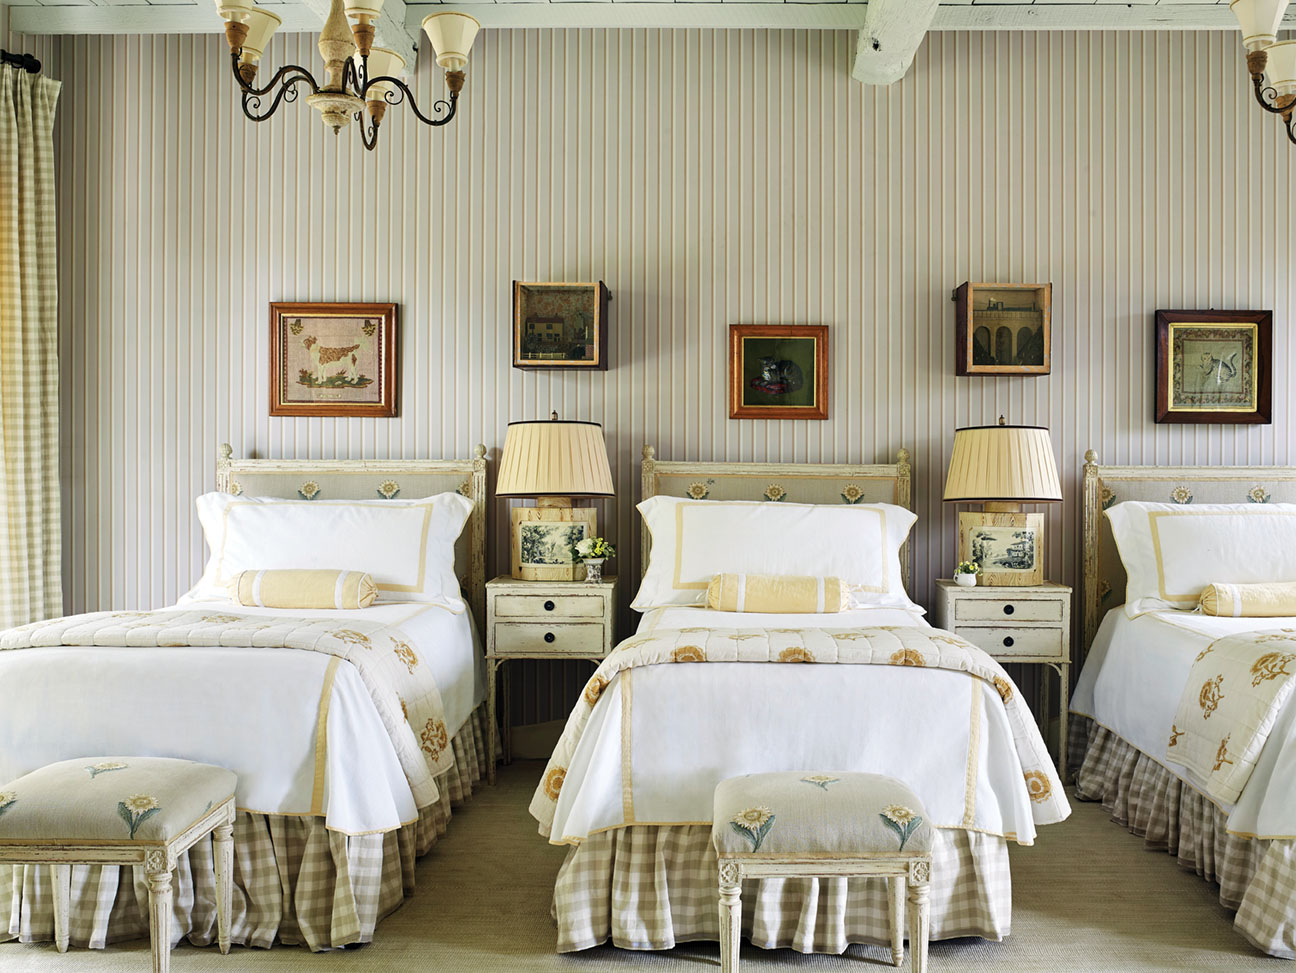 Guest room with three twin beds designed by Cathy Kincaid